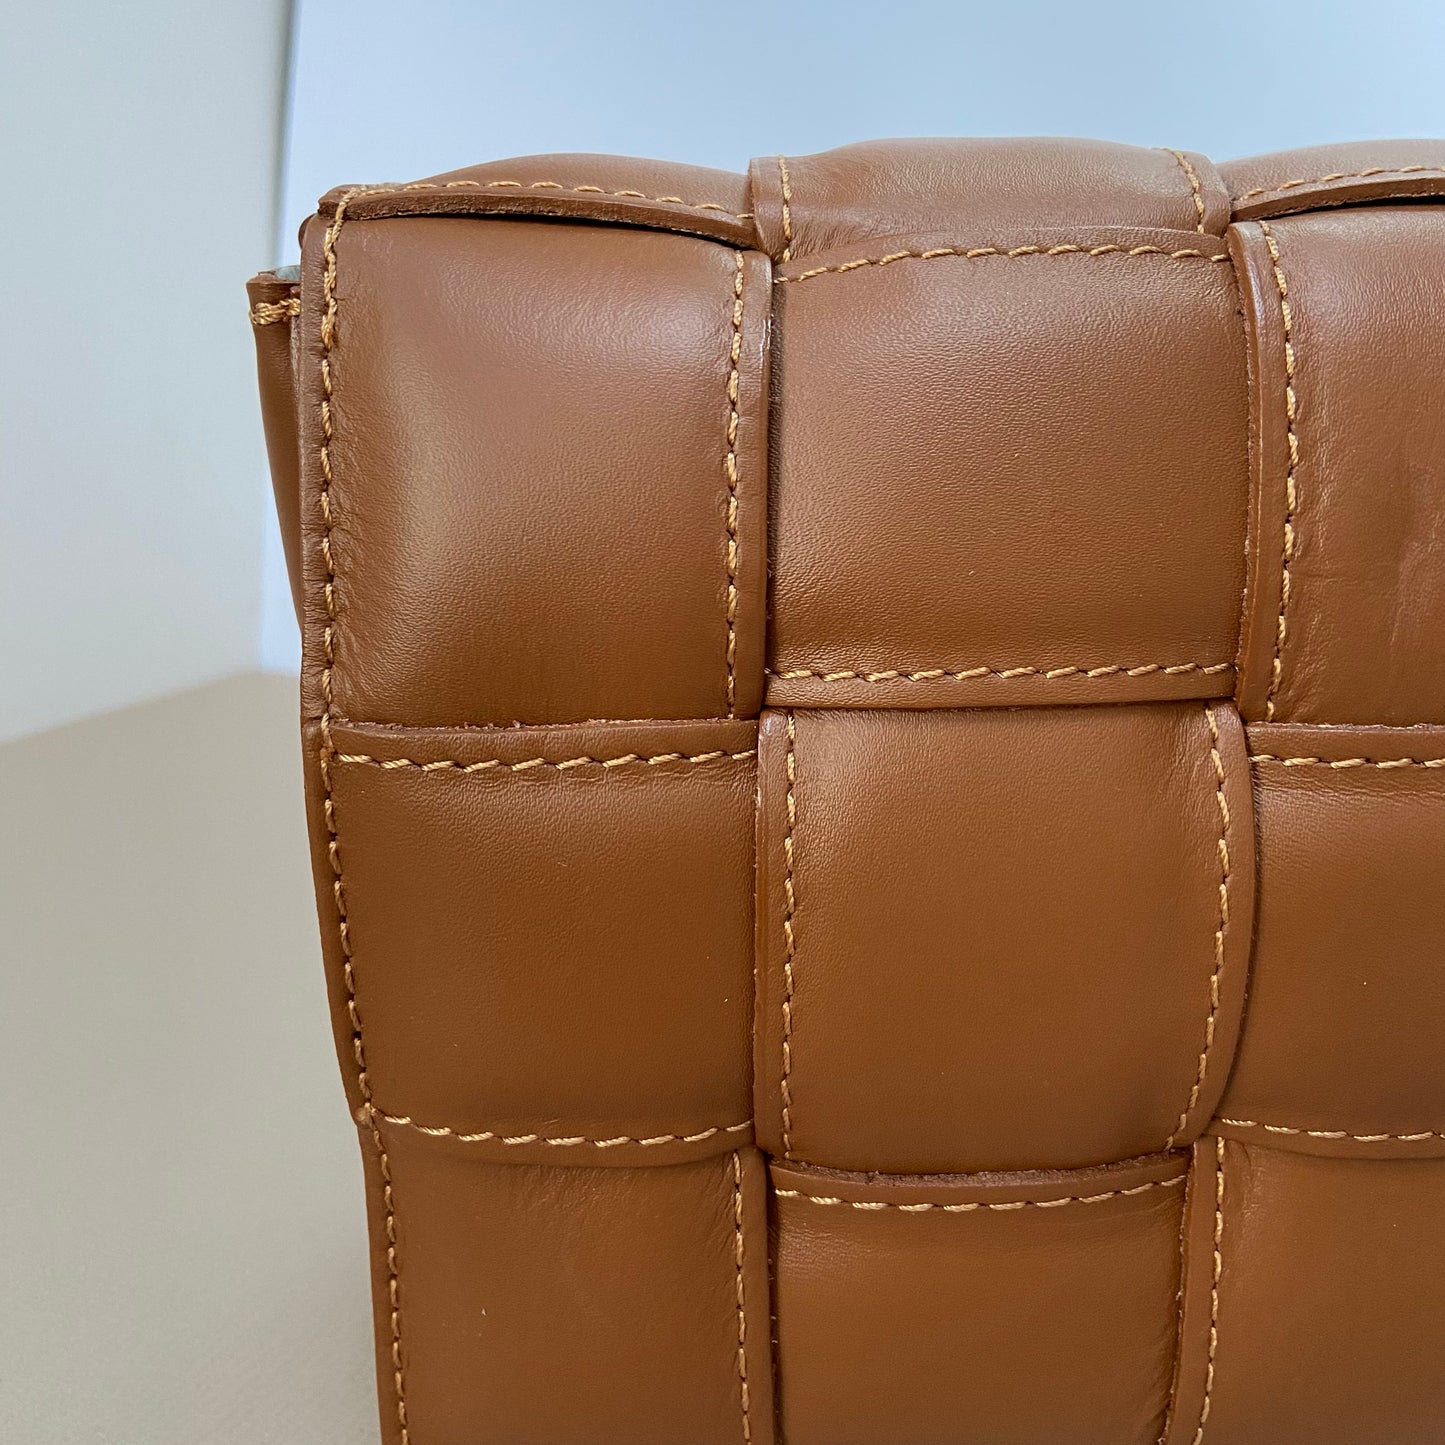 The Woven Padded Leather Bag